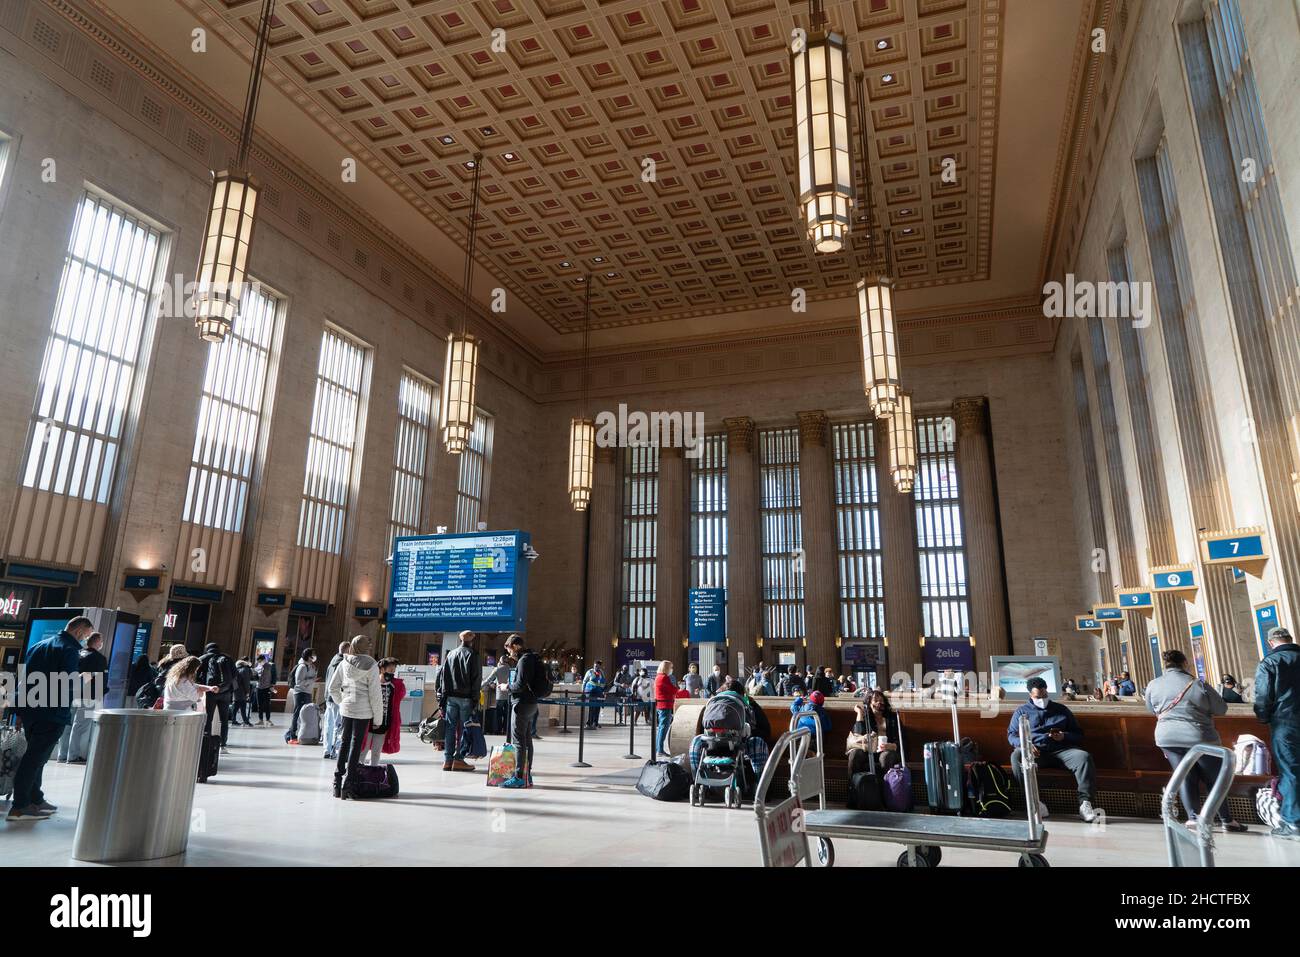 30th Street Station in Philadelphia, constructed between 1929 and 1934 by the Pennsylvania Railroad, has an imposing Art Deco waiting room. Stock Photo